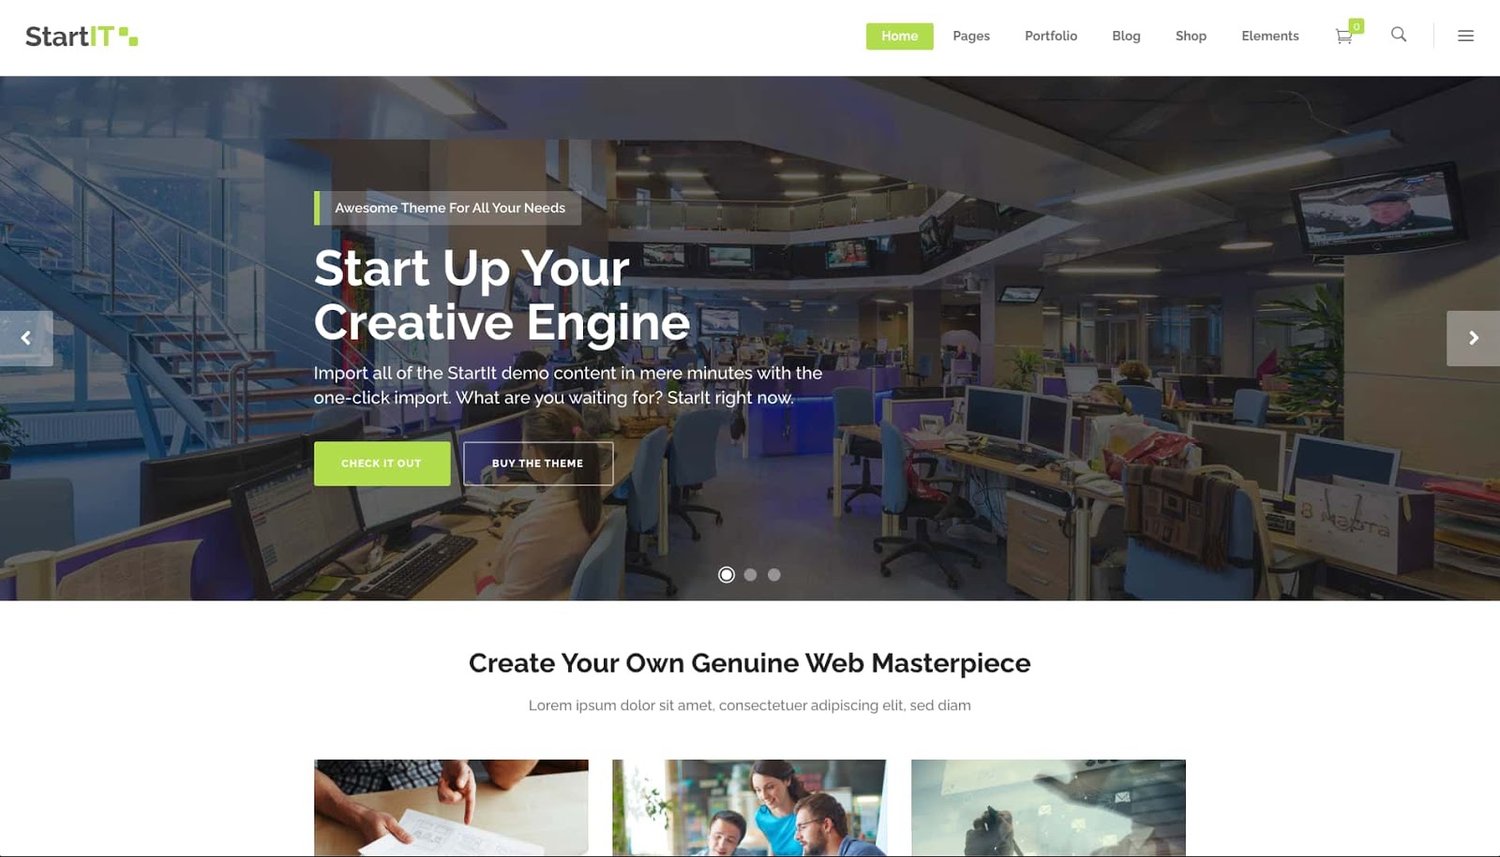 demo page for the wordpress theme with visual composer startIT